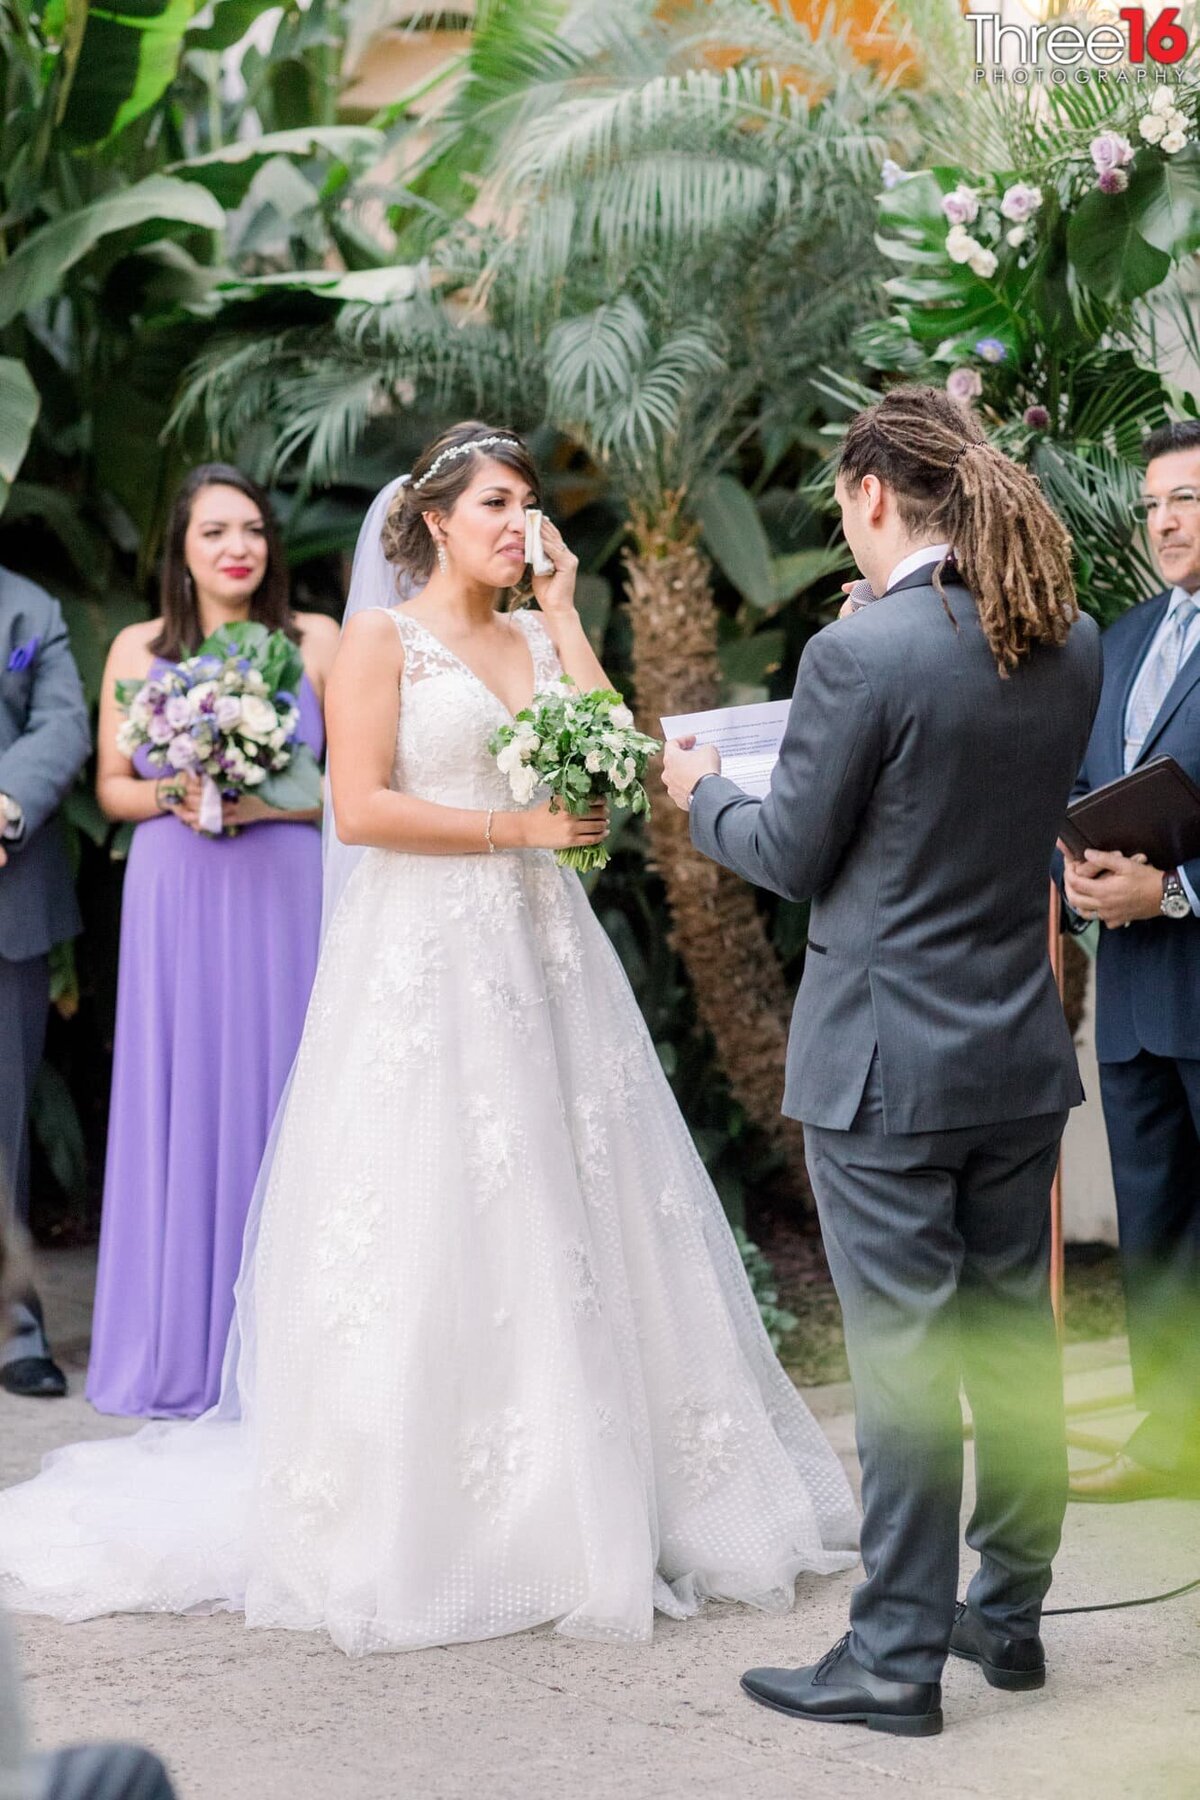 Bride wipes a tear from her cheek as her Groom reads his vows to her at the altar